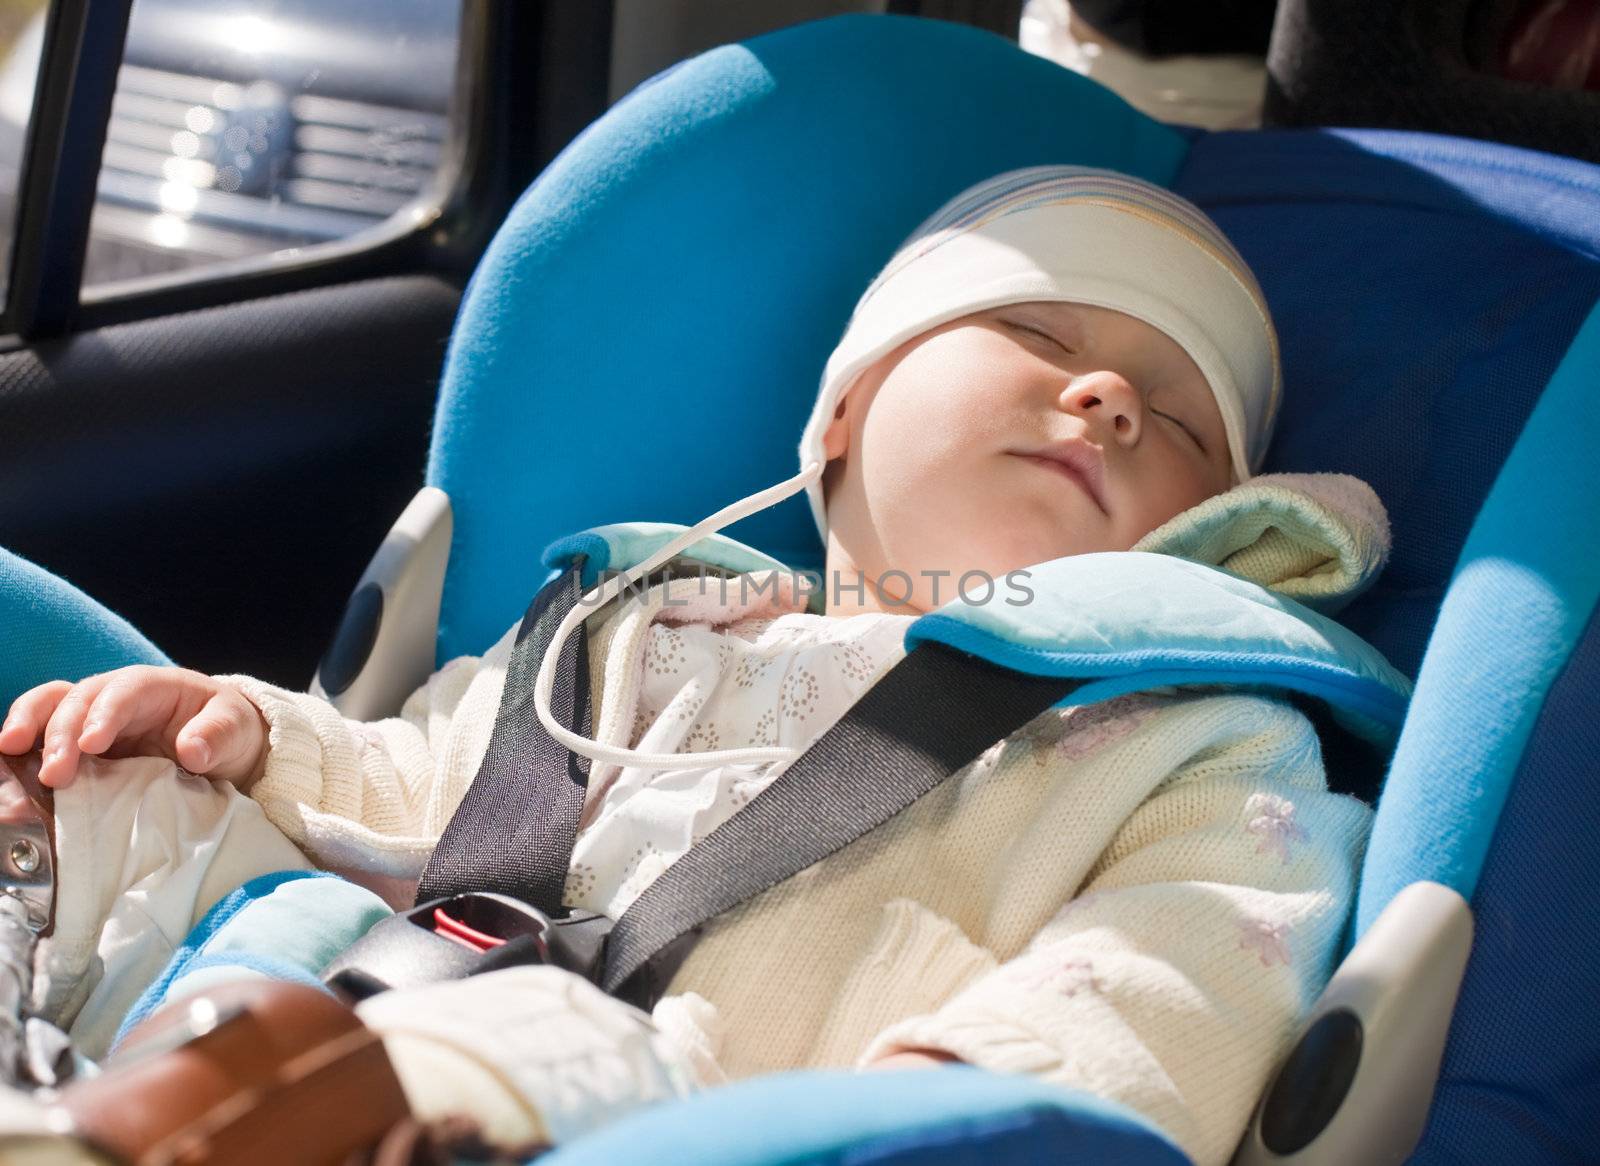 Toddler in a car seat by naumoid